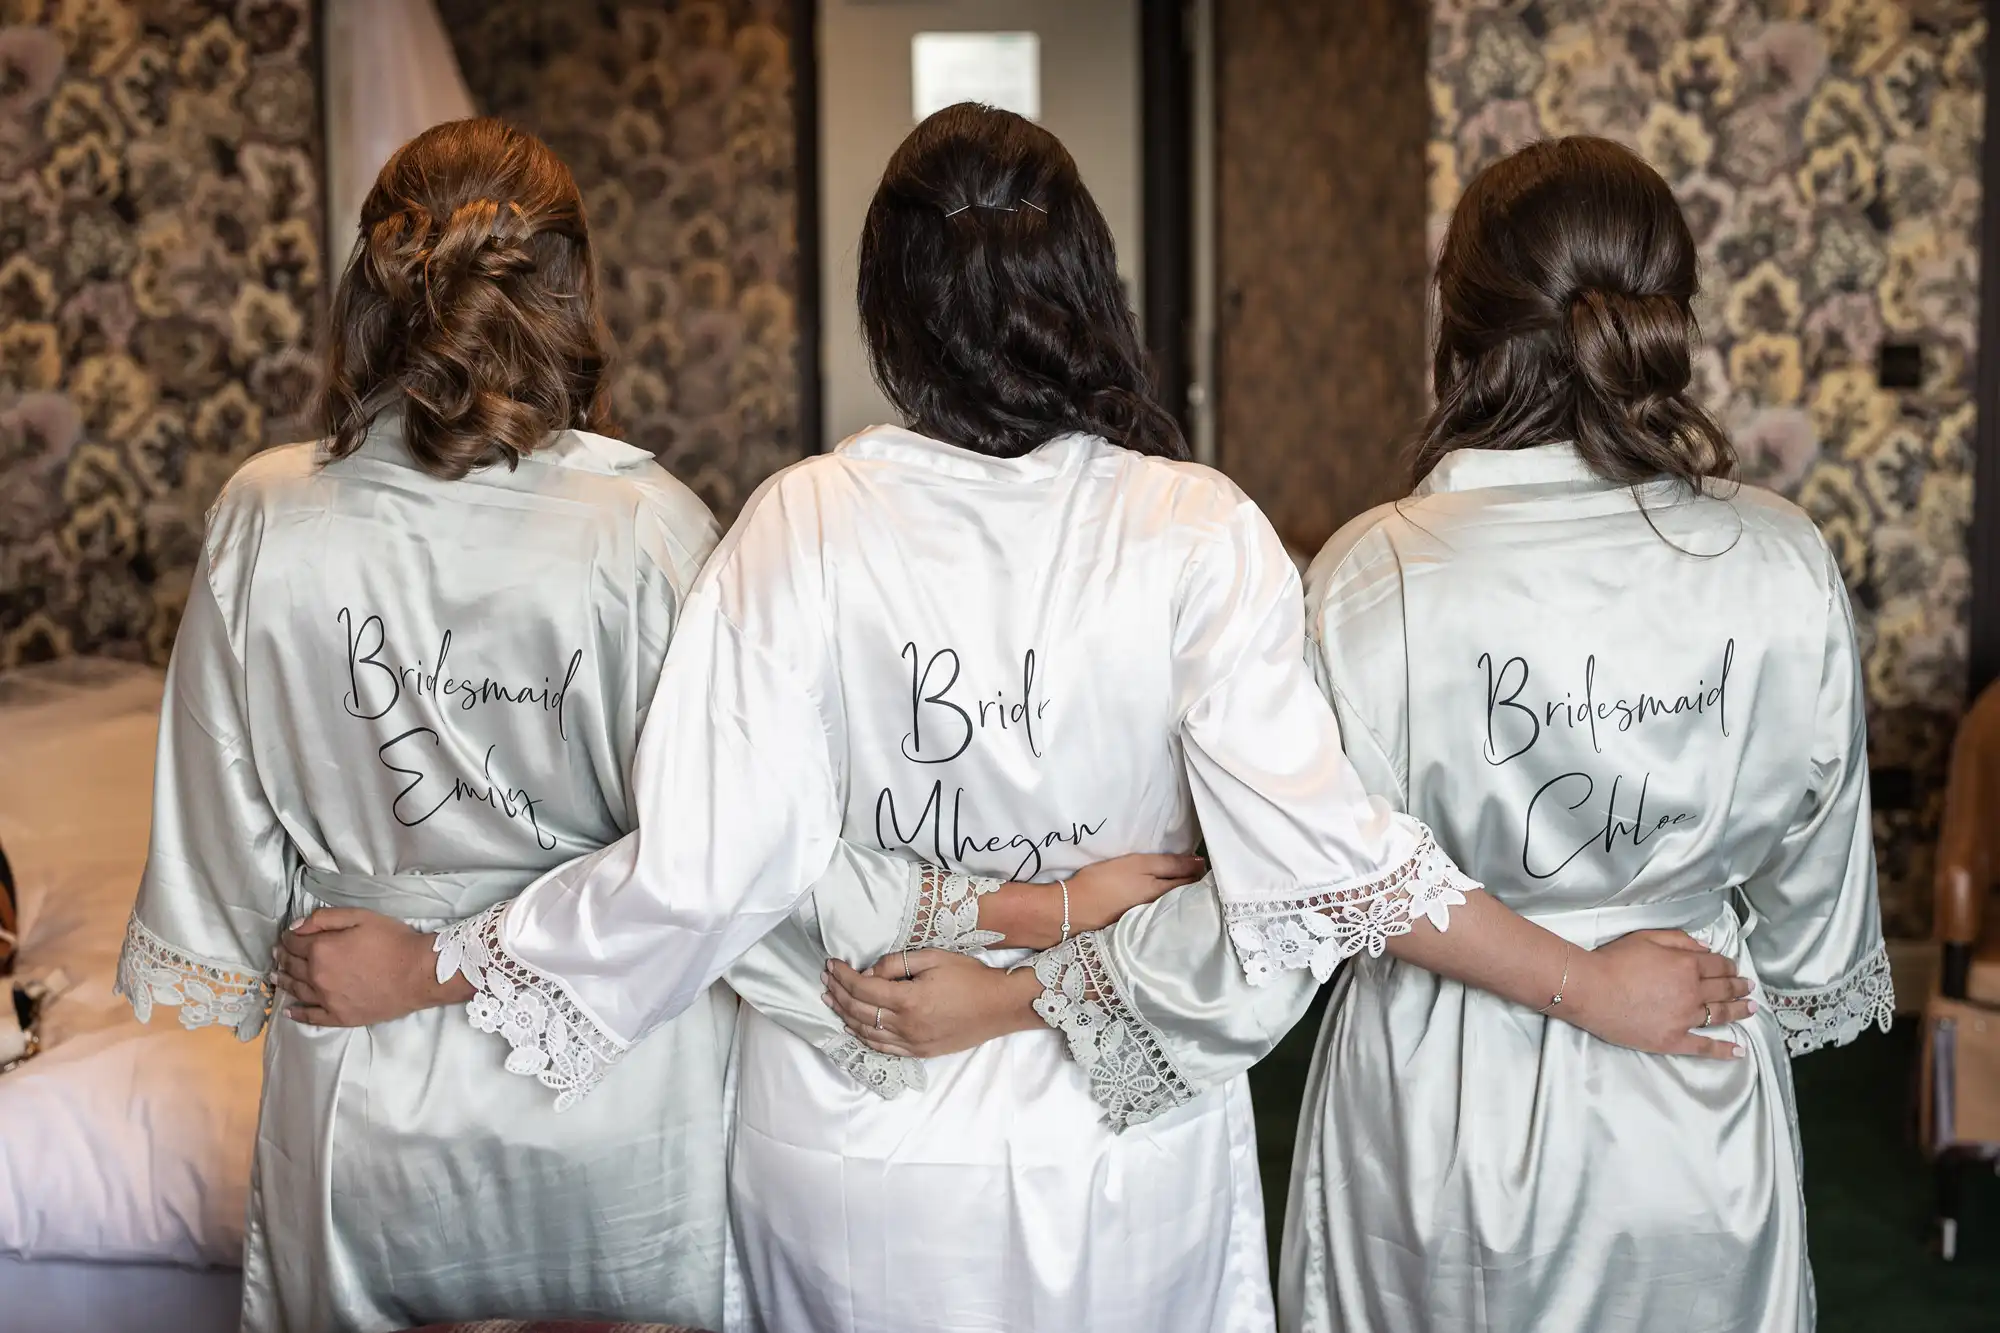 Three women wearing silk robes with "Bridesmaid" and "Bride" written on the back, standing together with arms around each other, facing away from the camera.